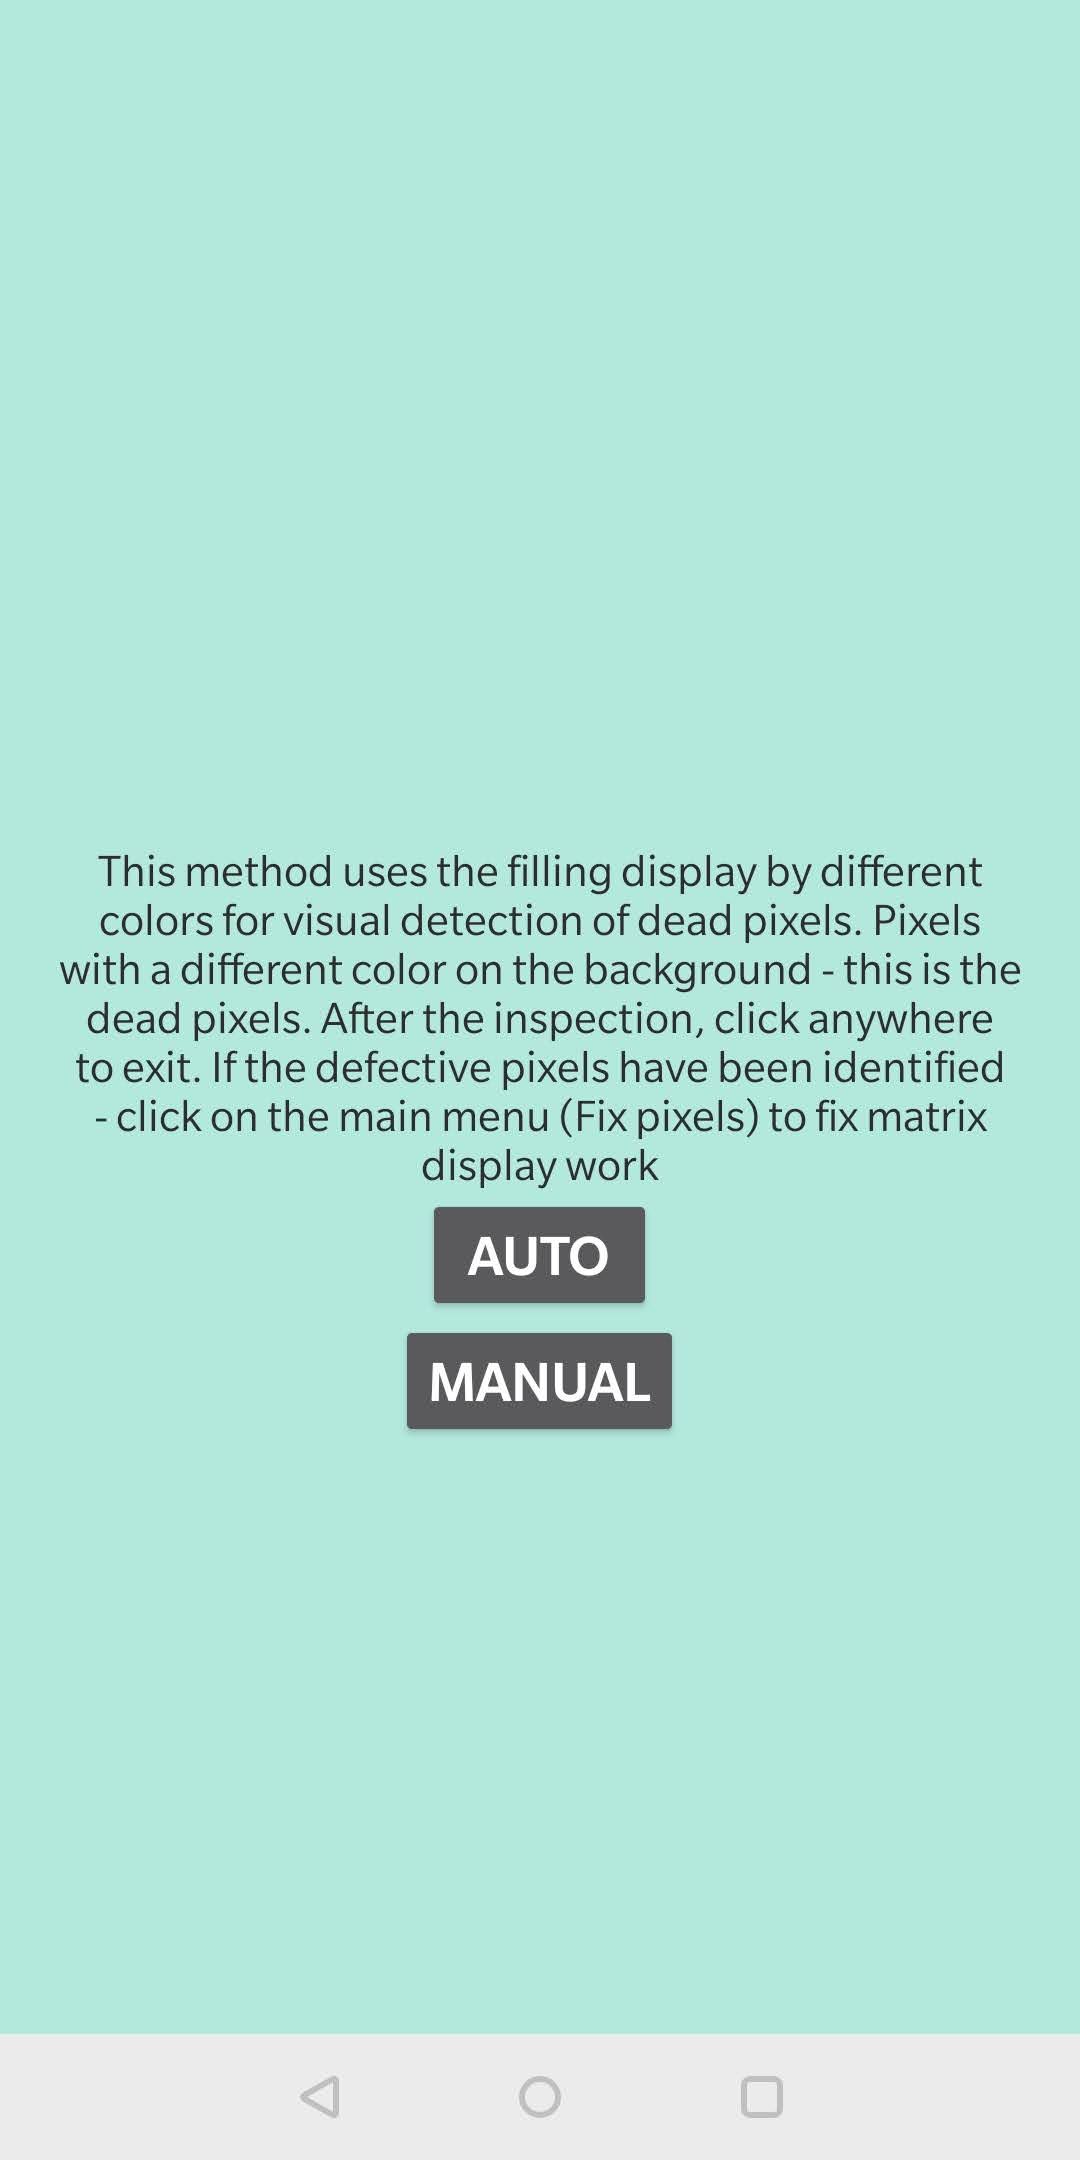 Dead Pixel Test and Fix selection window for Auto and Manual detection.